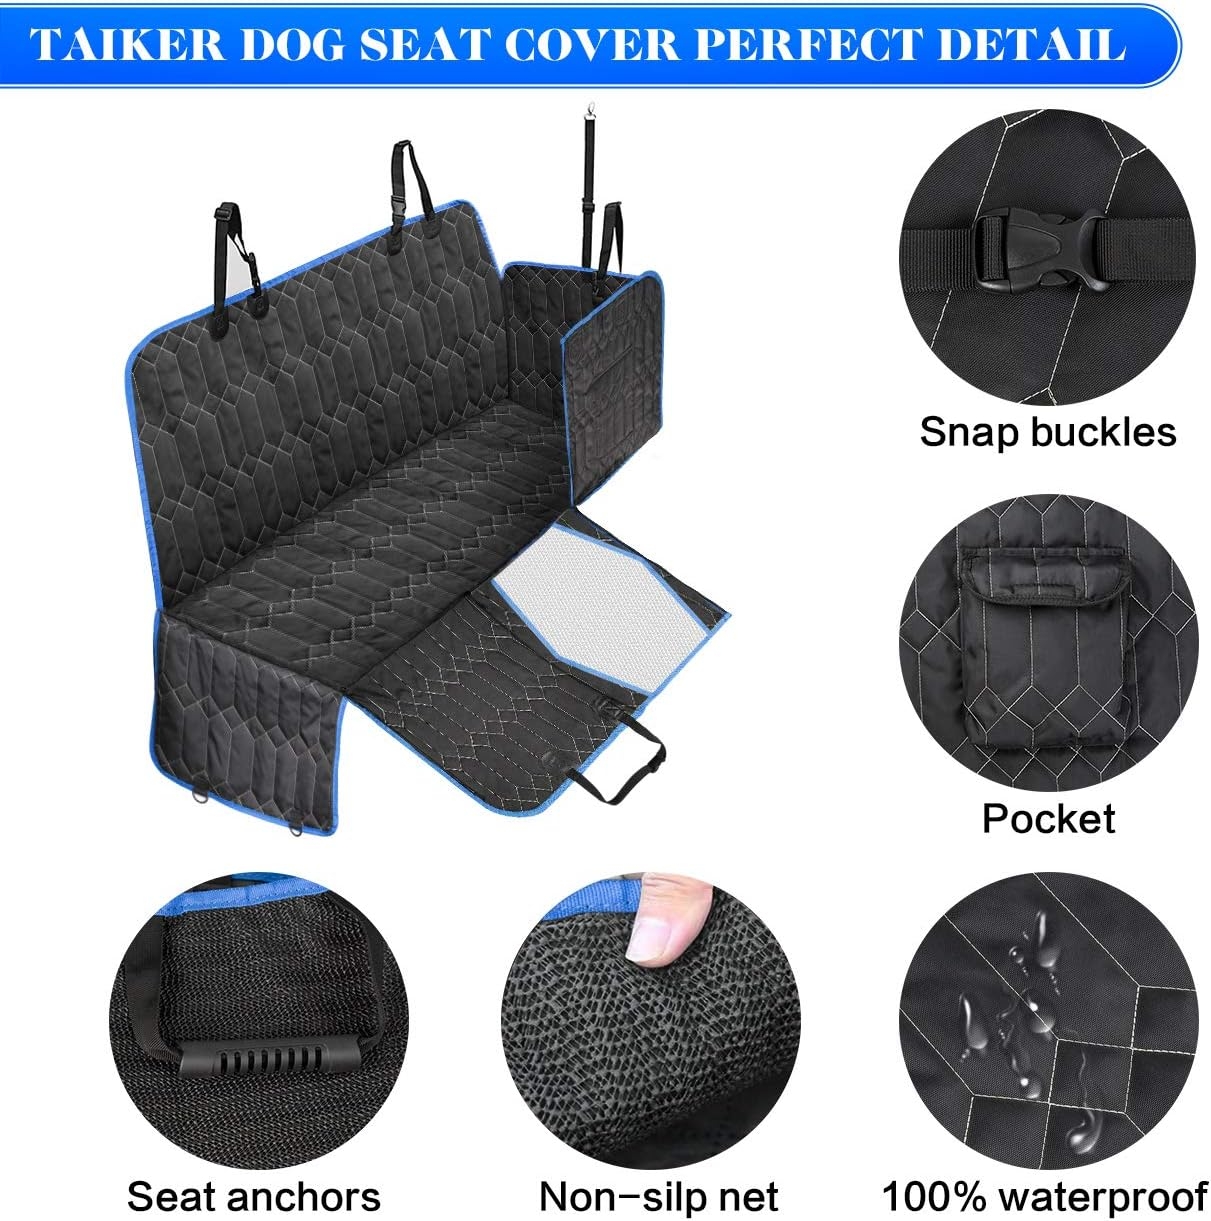 ［Upgraded Version］ Dog Car Seat Cover for Back Seat, 100% Waterproof Back Seat with Mesh Window, Scratch Proof Nonslip Dog Car Hammock for All Cars, Trucks